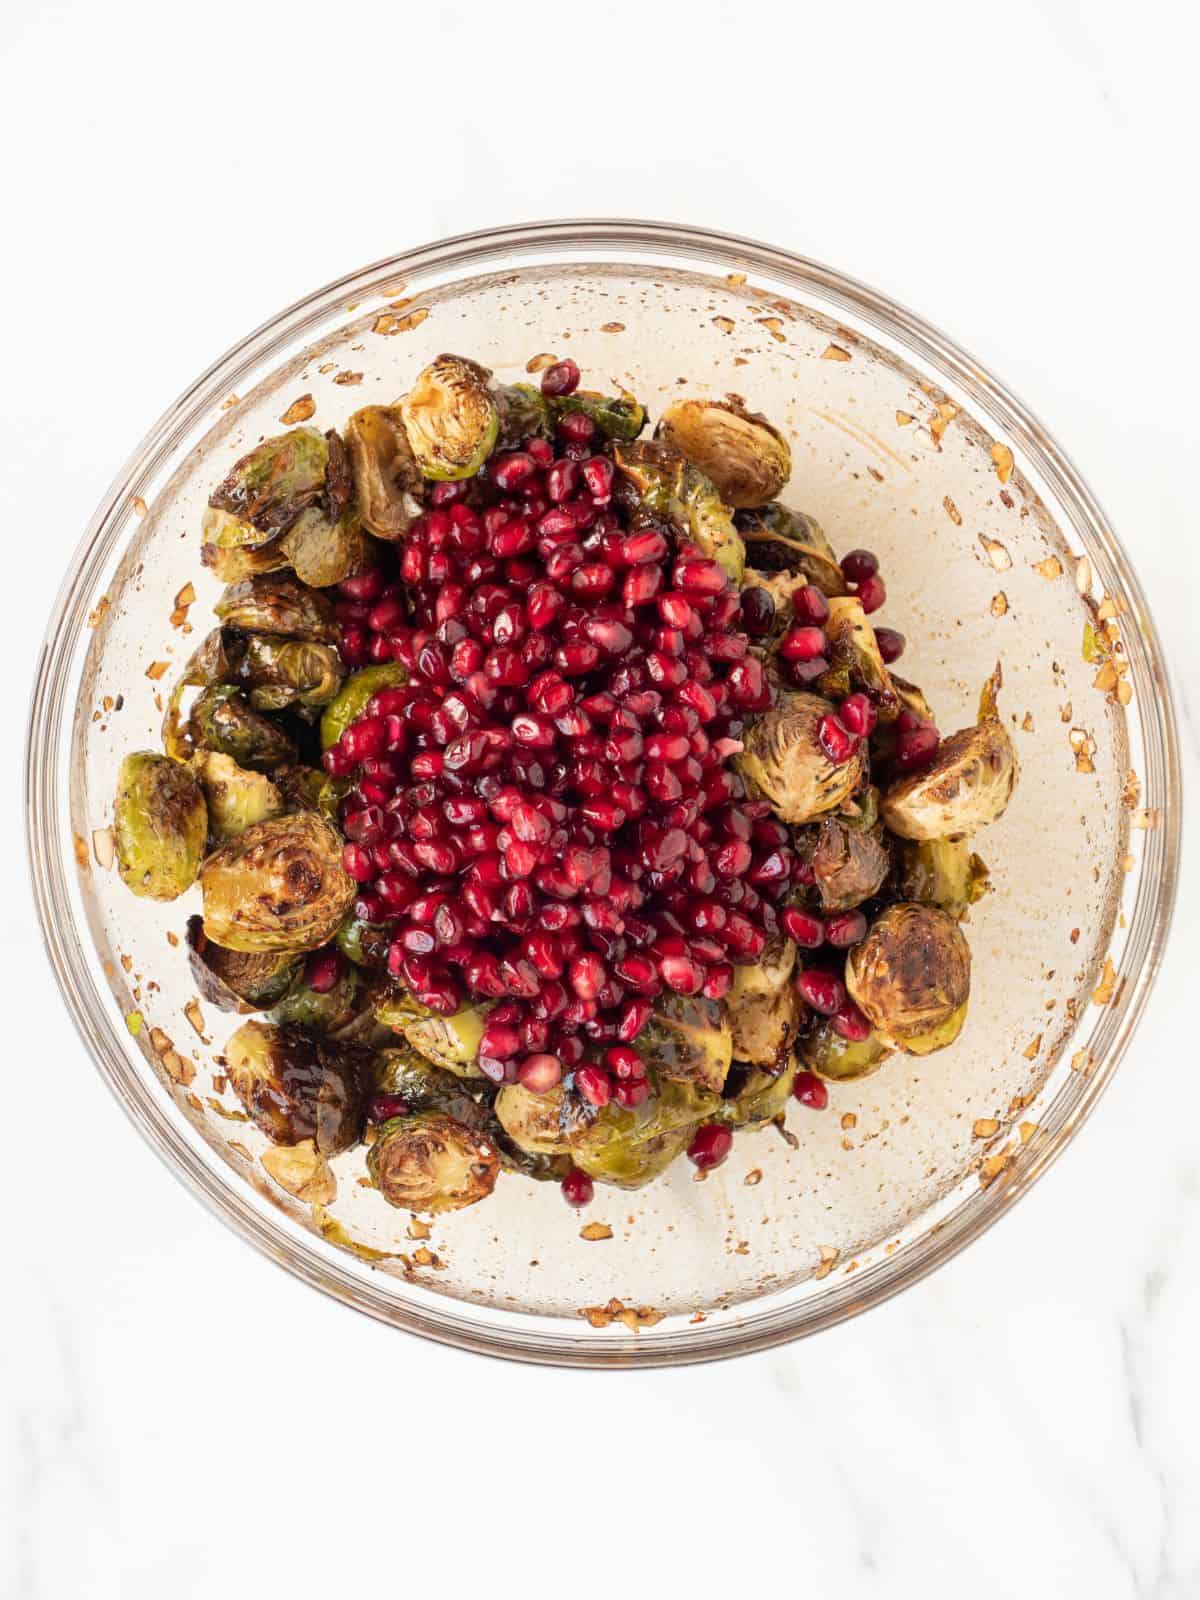 A glass mixing bowl with roasted brussels sprouts salad topped with pomegranate seeds.